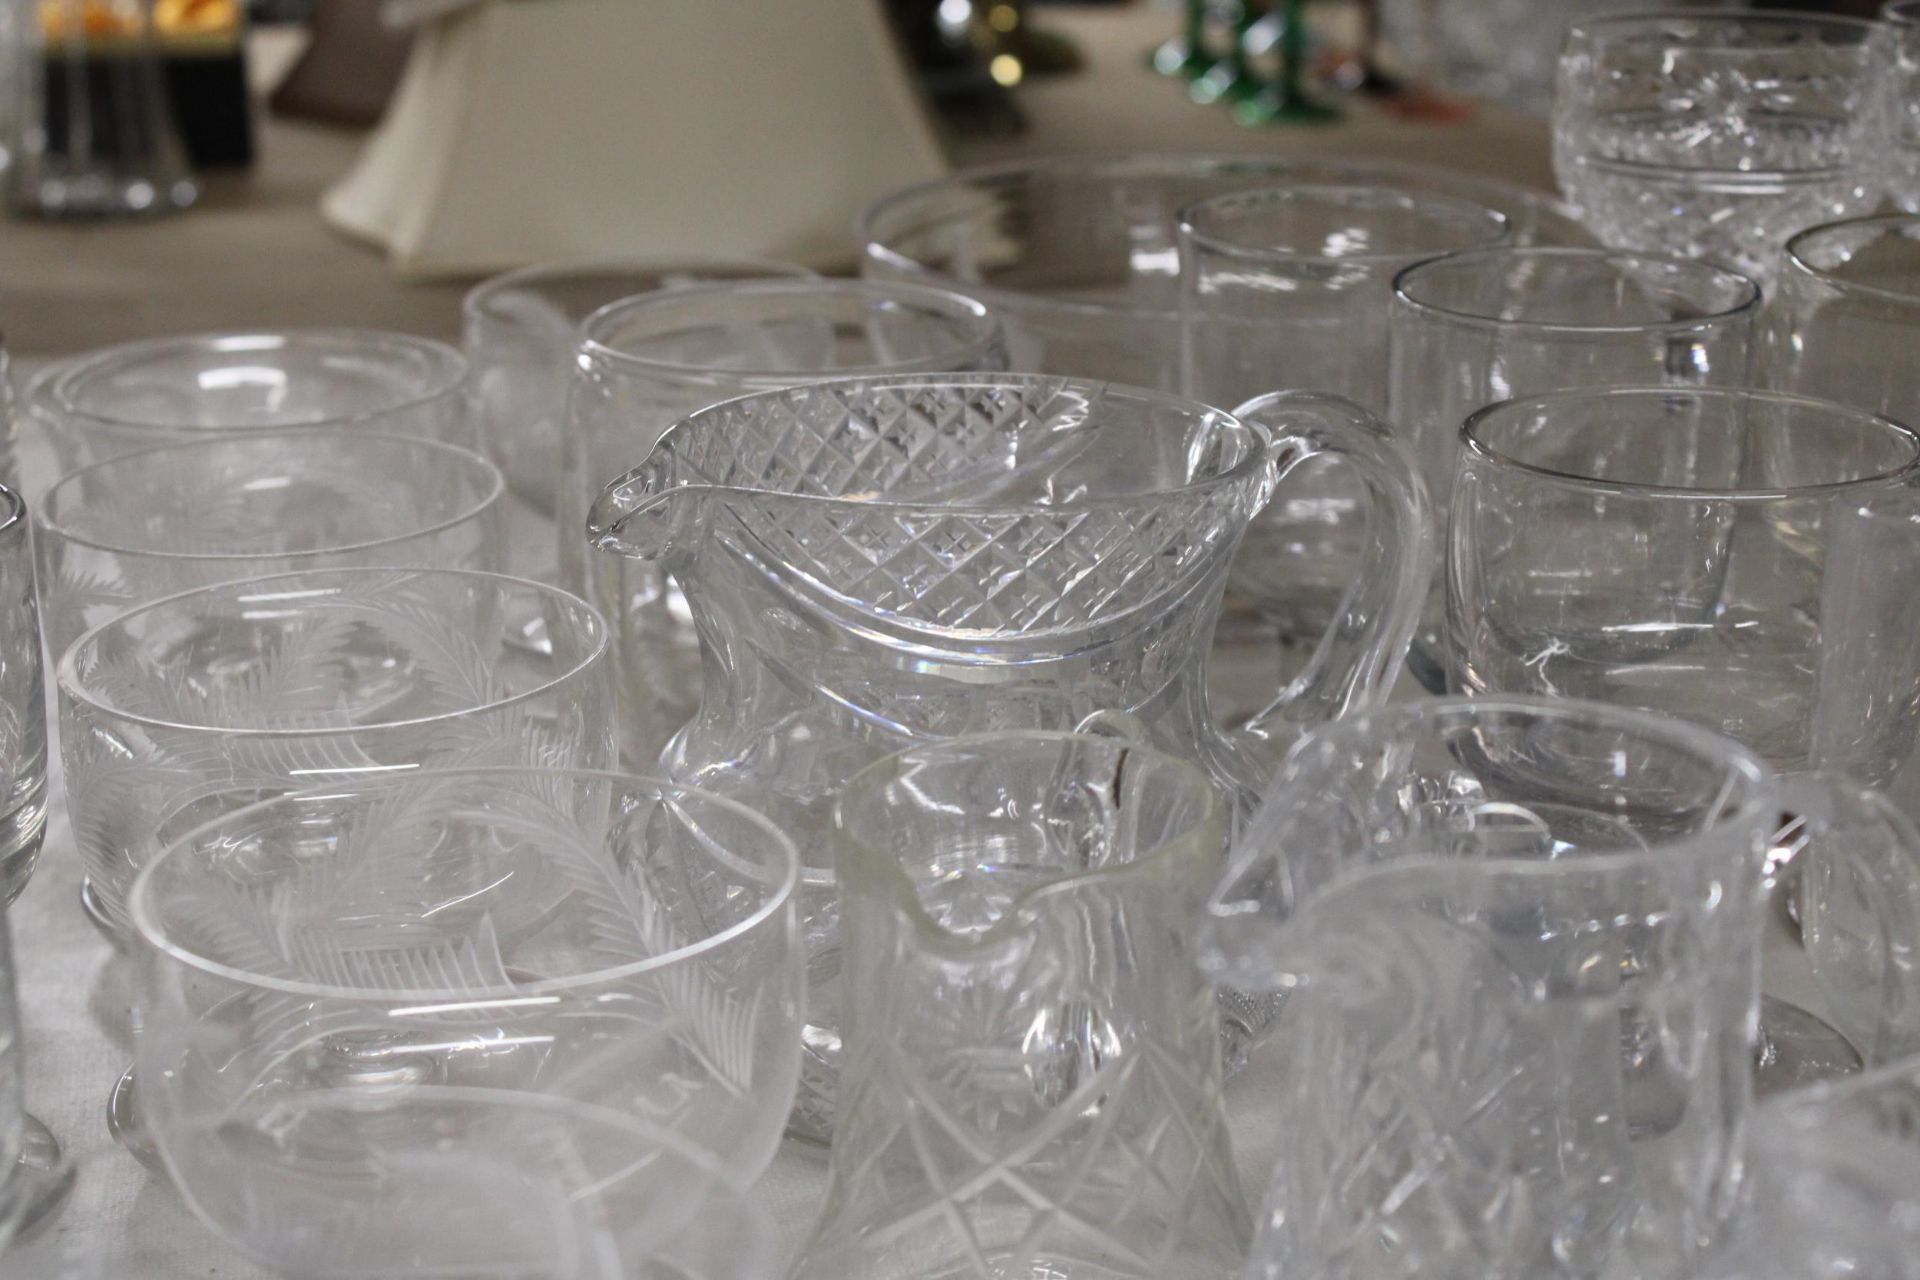 A LARGE COLLECTION OF GLASSWARE TO INCLUDE DESSERT DISHES, JUGS, WINE GLASSES ETC - Image 6 of 6